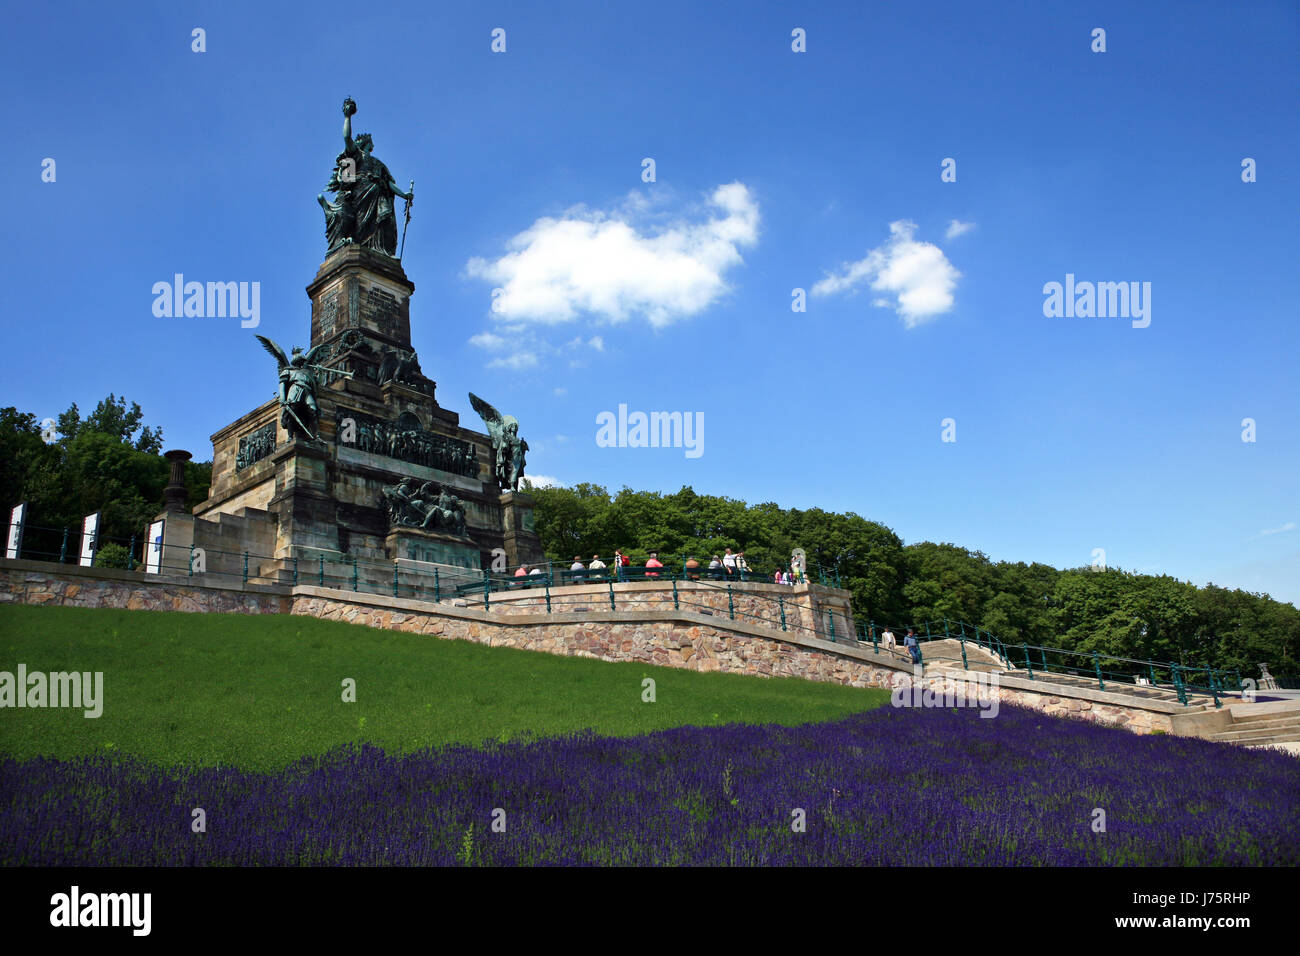 monument upper german federal republic germany middle rhine valley story Stock Photo